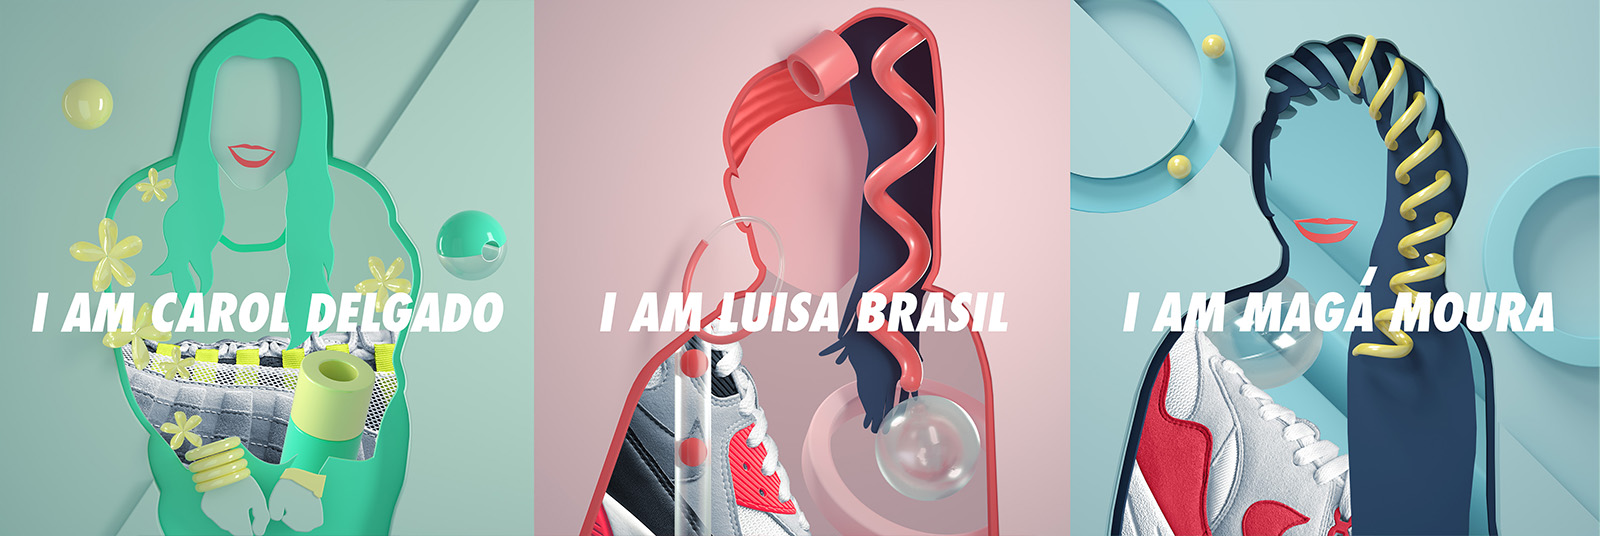 NIKE Influencers design asset by Machineast Singapore